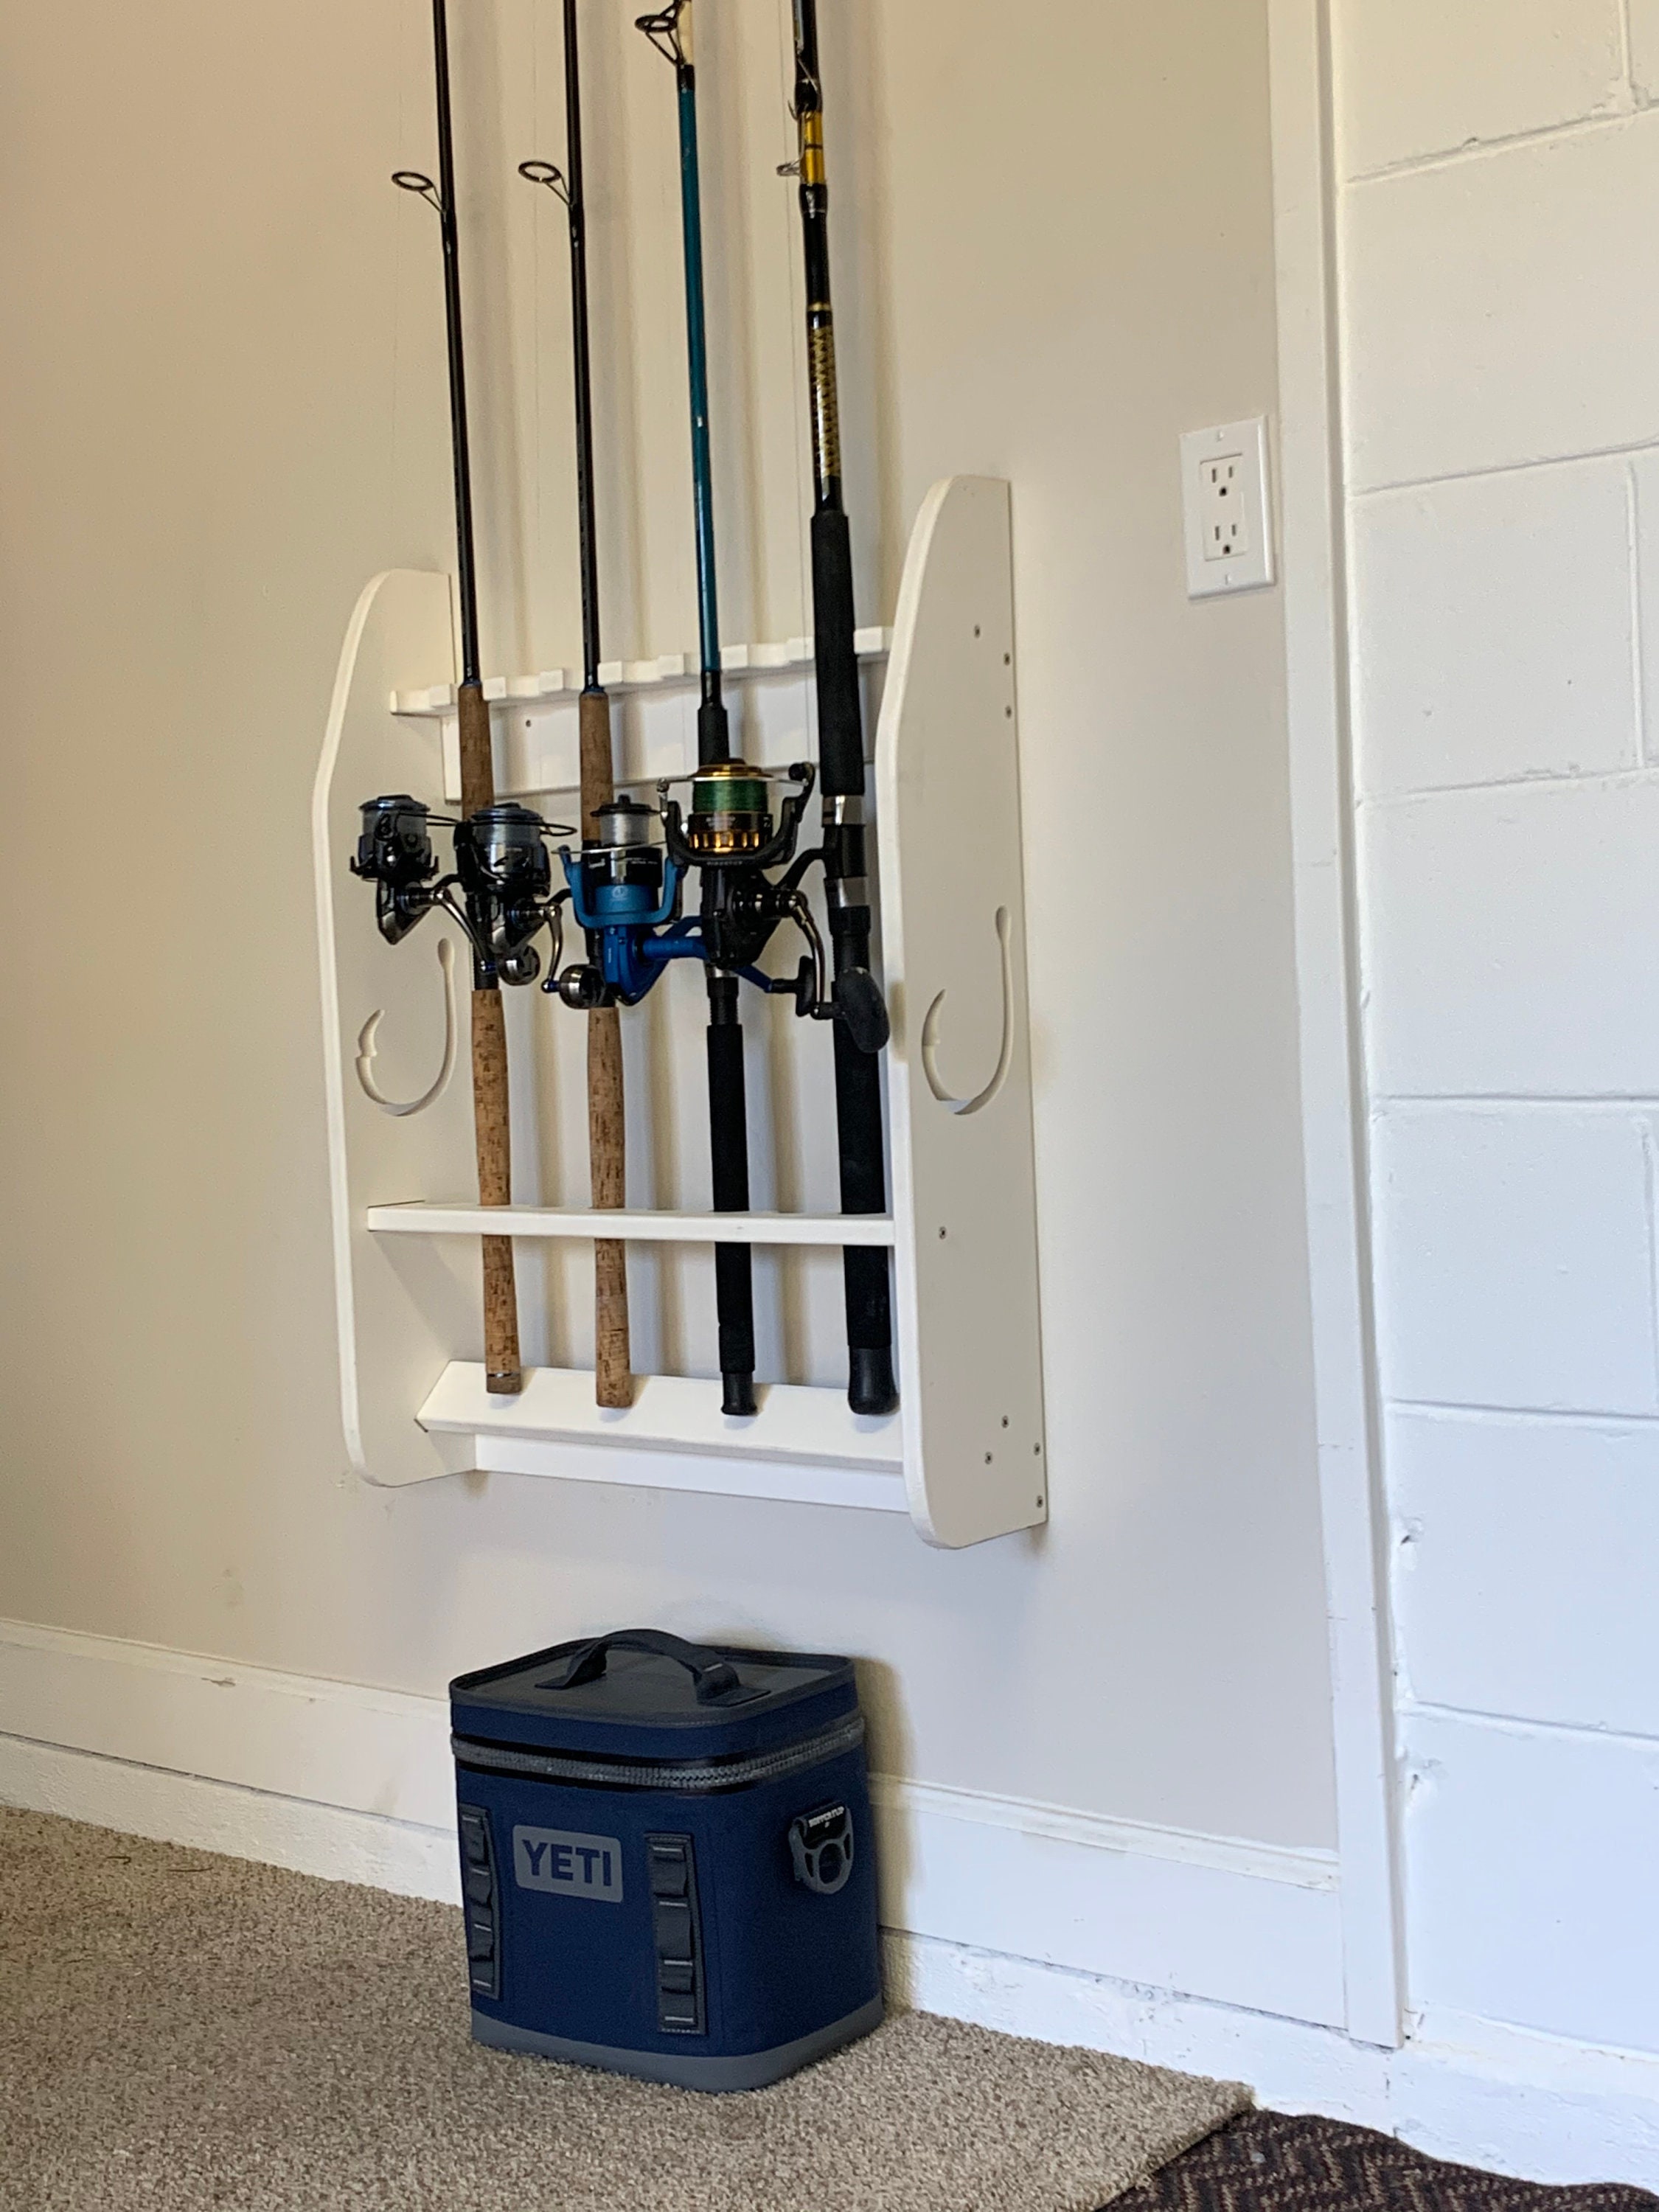 Fishing Rod Rack Fishing Rod Storage, for Wall or Ceiling Mount